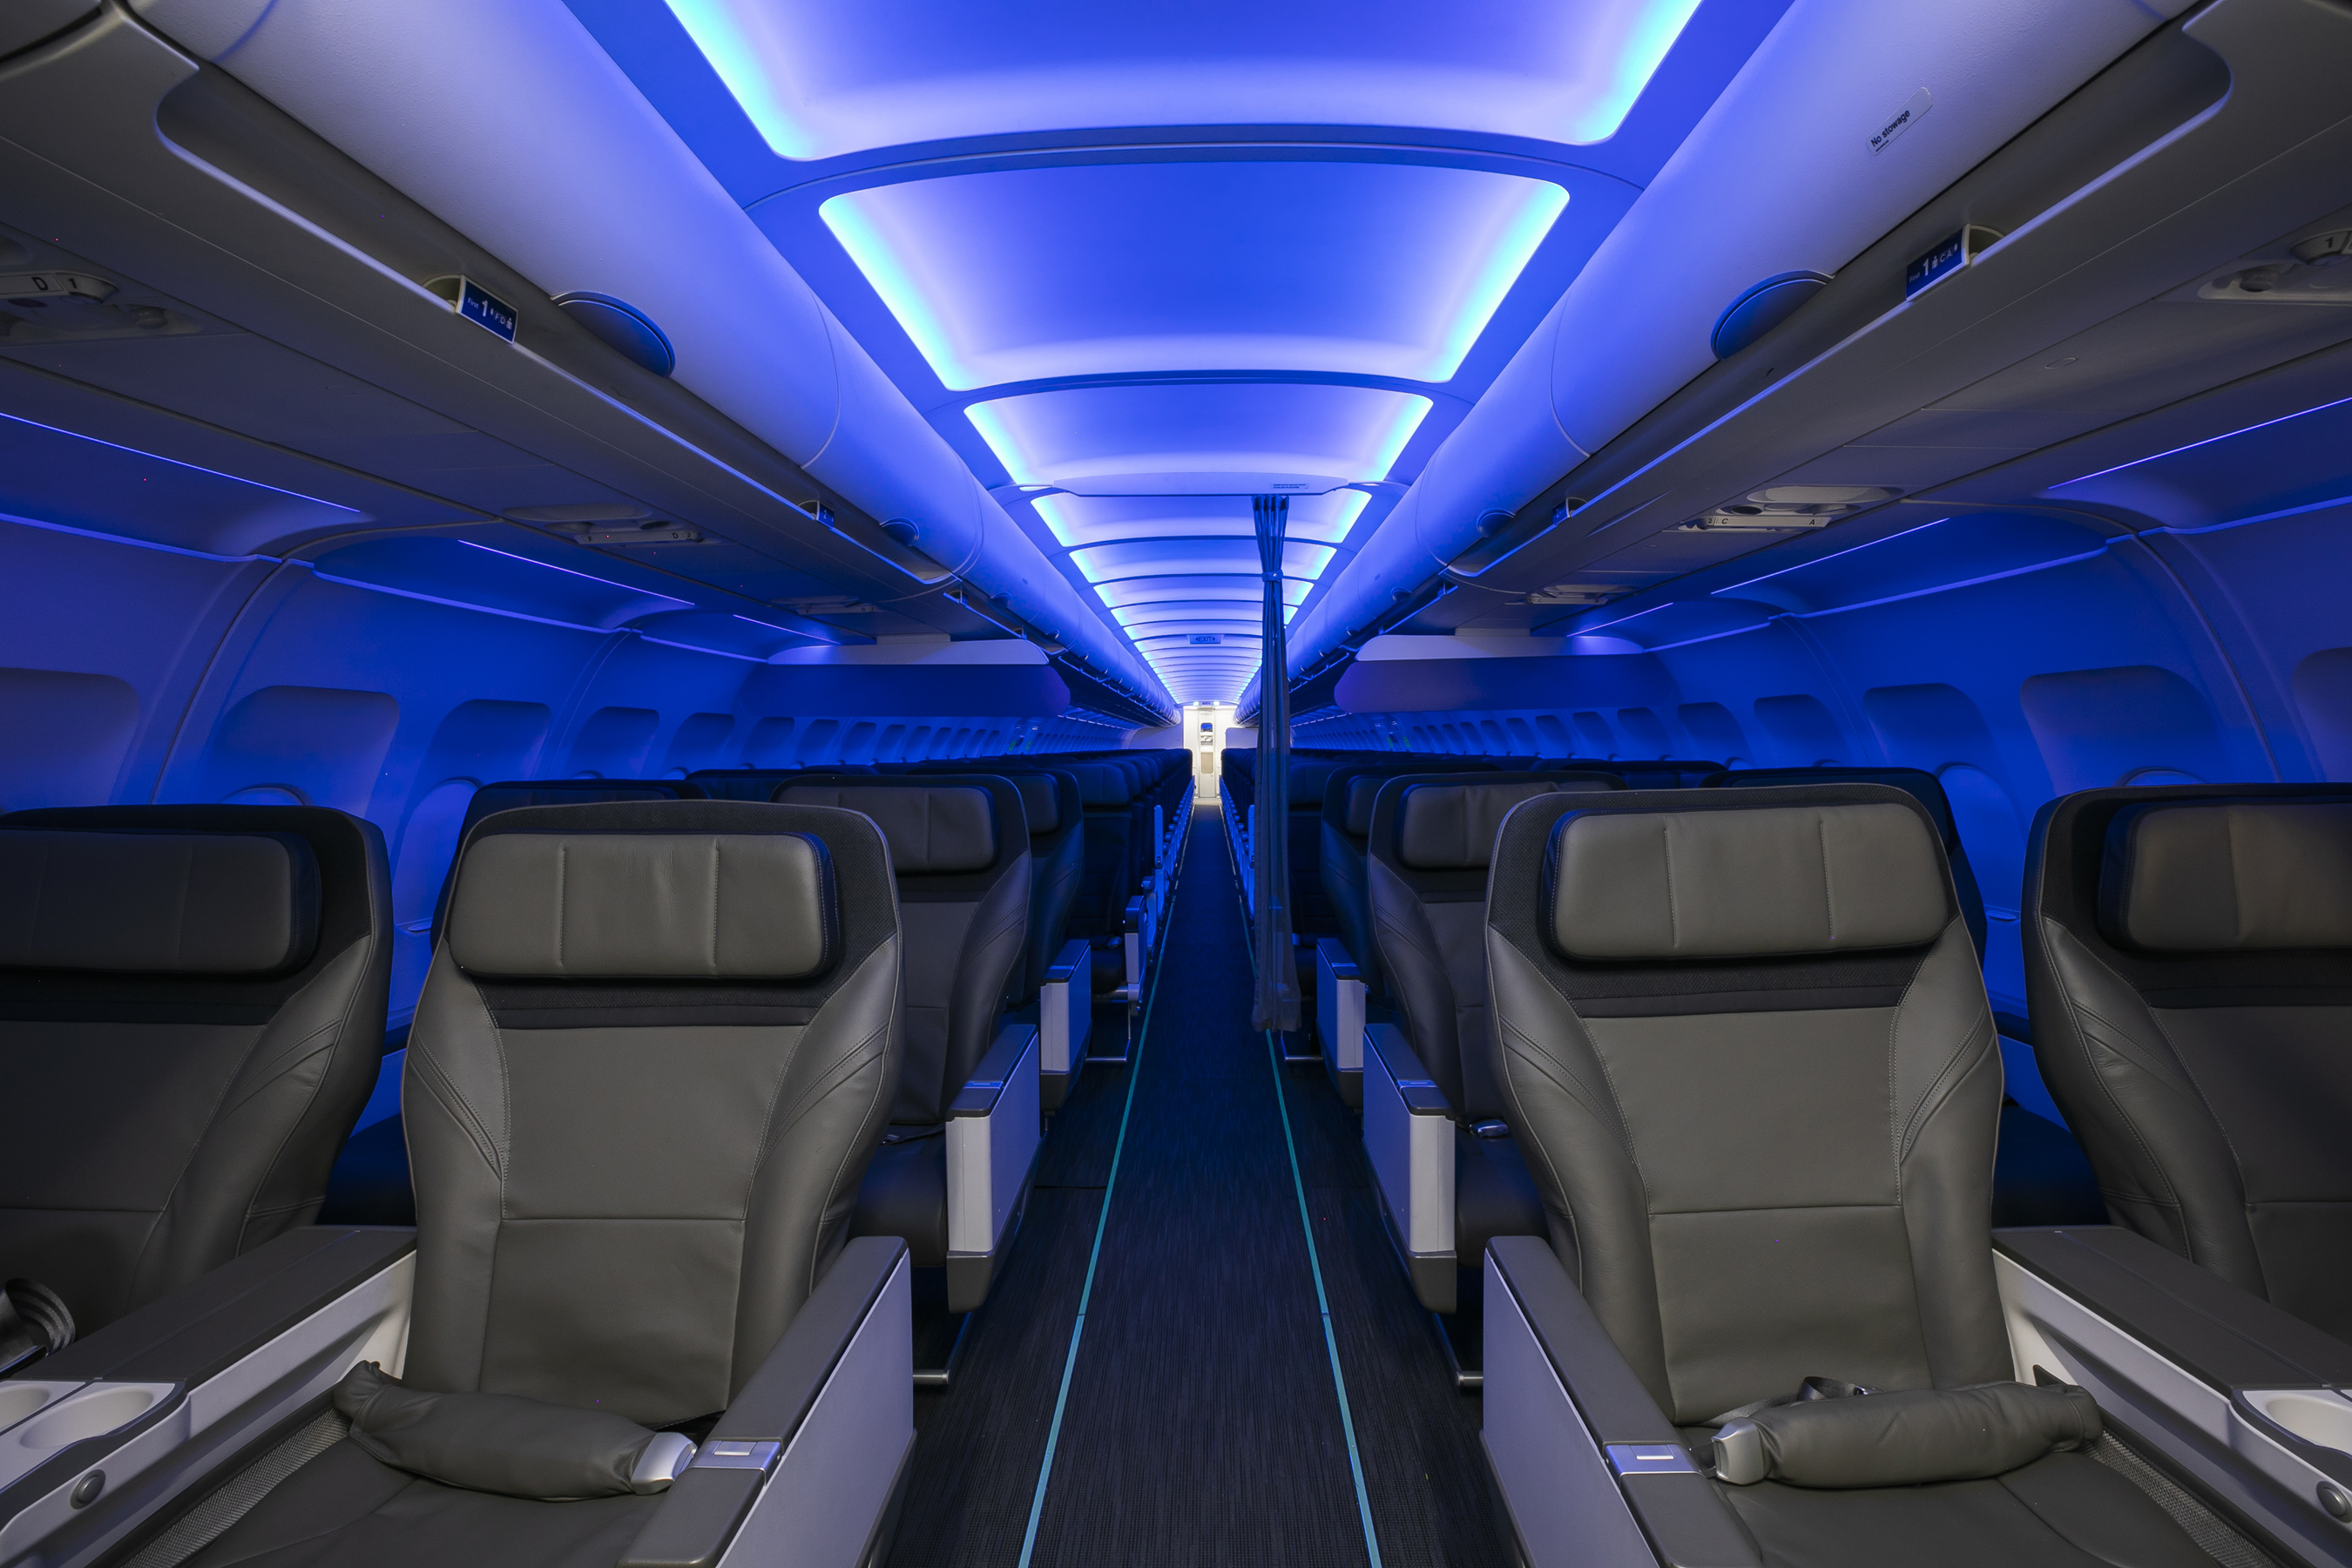 Ambient mood lighting with calming blue hues complements the human body's natural circadian rhythm, promoting rest or productivity depending on the time of day. The curated onboard music program has a cool West Coast vibe that balances the relaxing and modern ambiance.